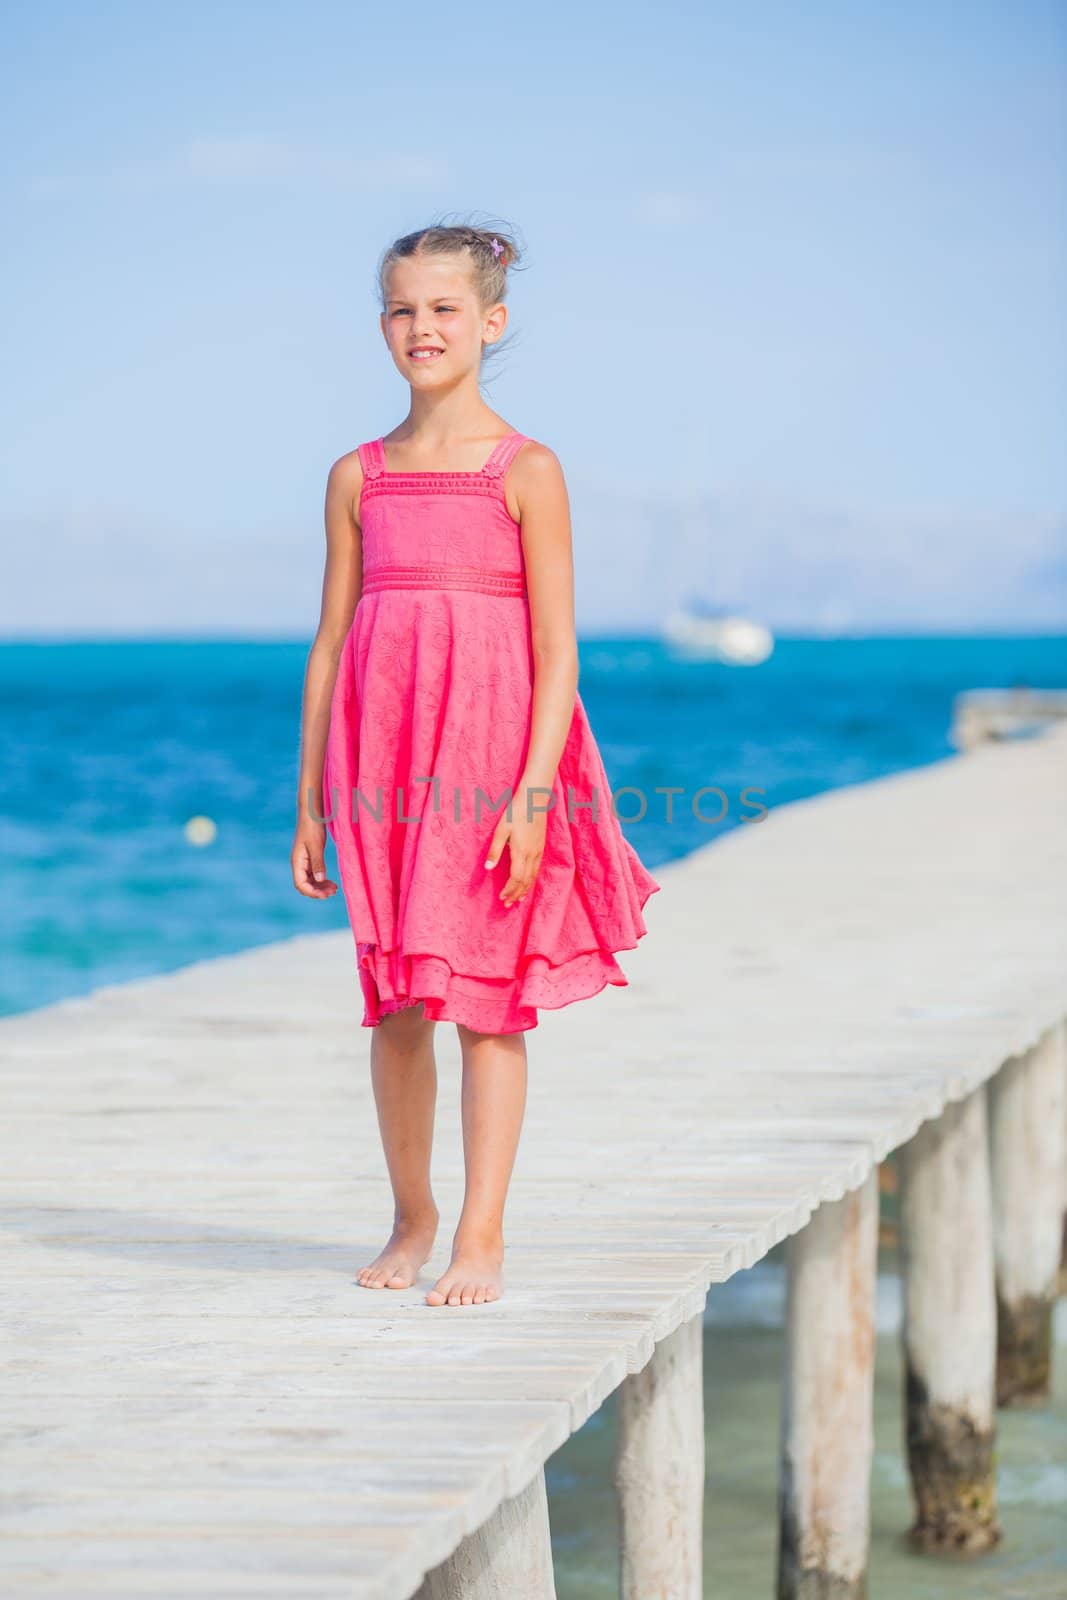 Cute teens girl walking on jetty with turquoise sea